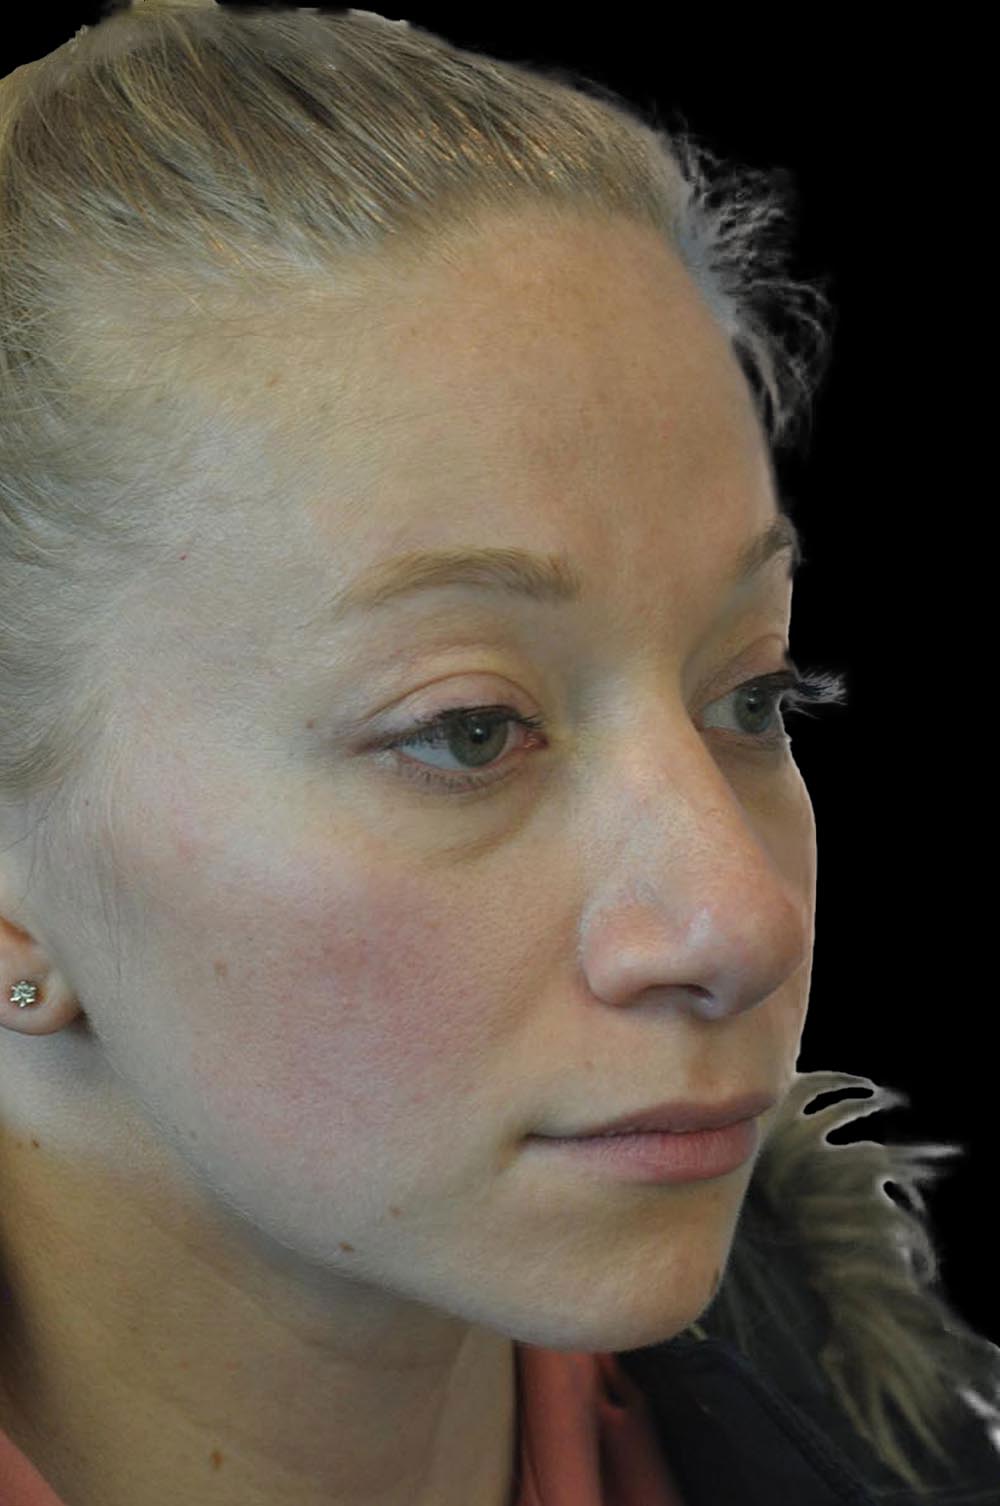 Photo of the patient’s face after the Rhinoplasty surgery. Patient 11 - Set 4